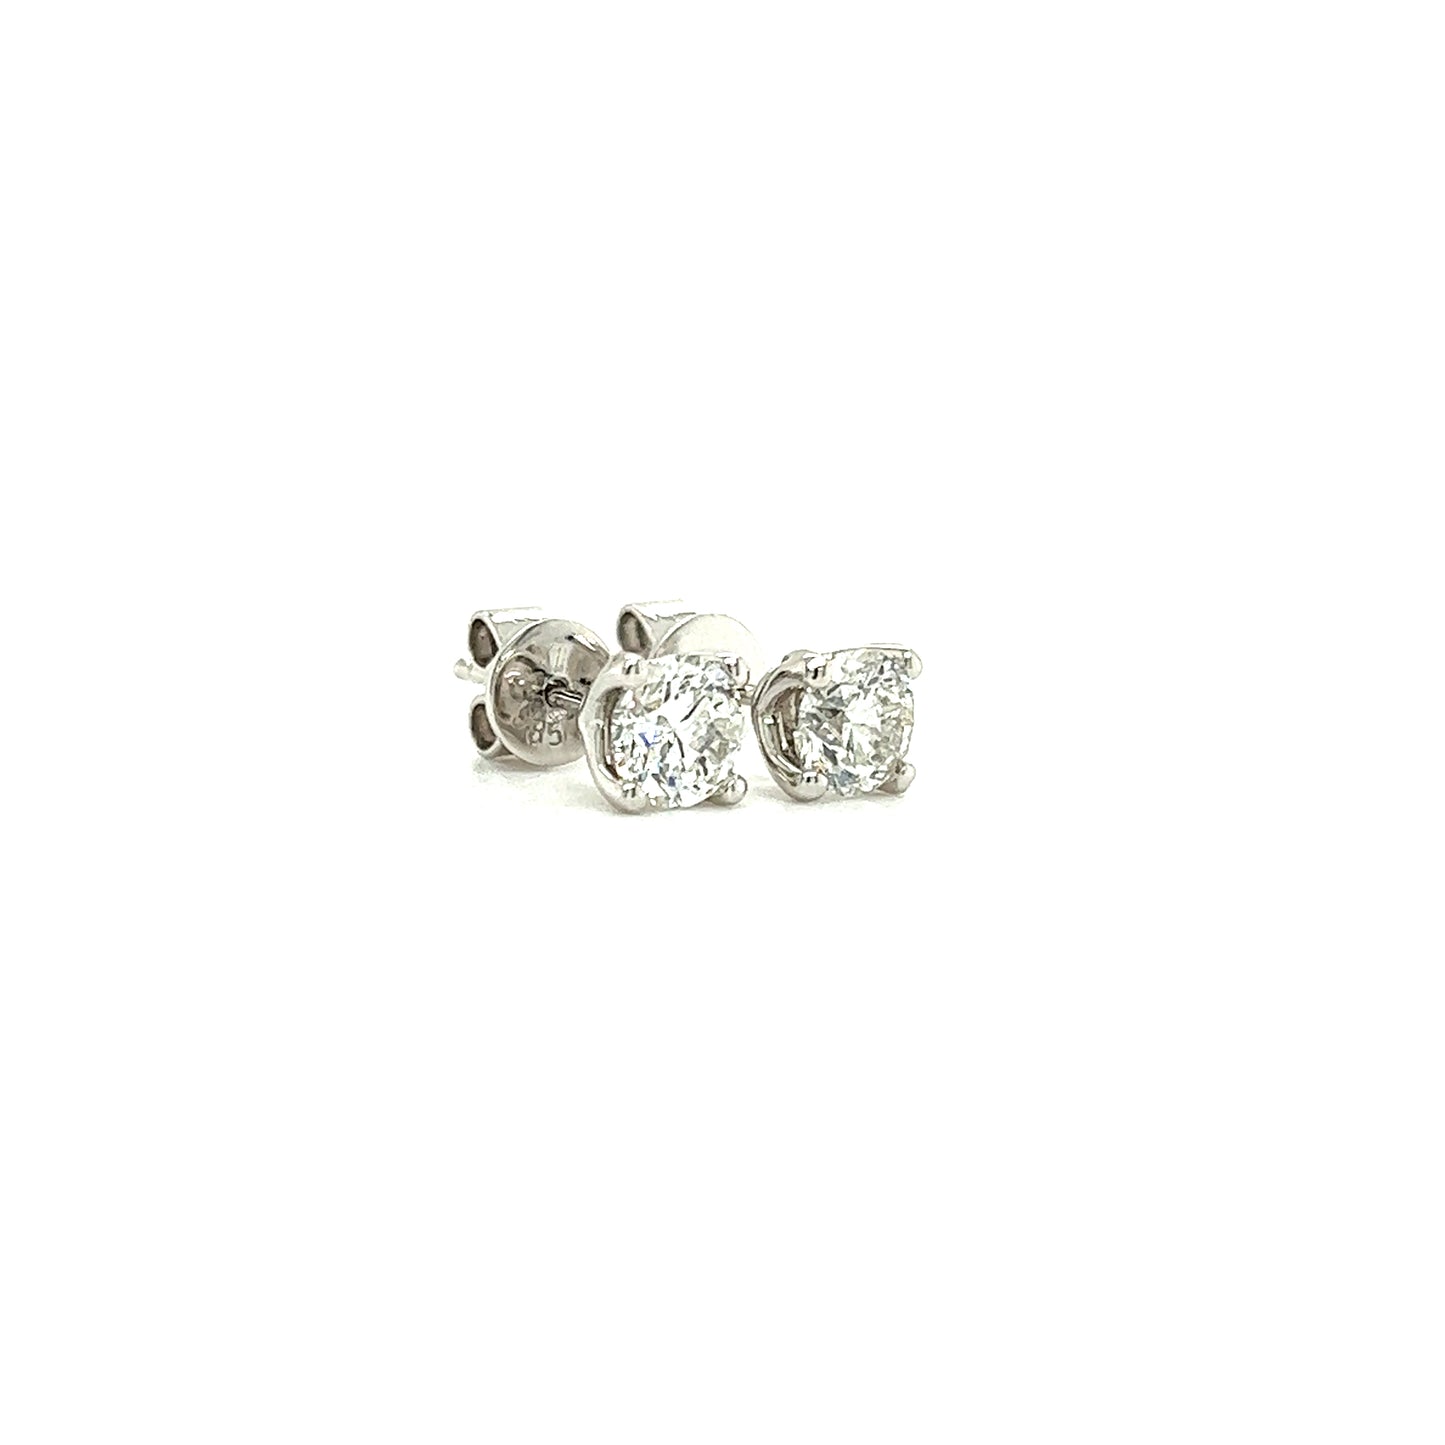 Diamond Stud Earrings with 1ctw of Diamonds in 14K White Gold Left Side View